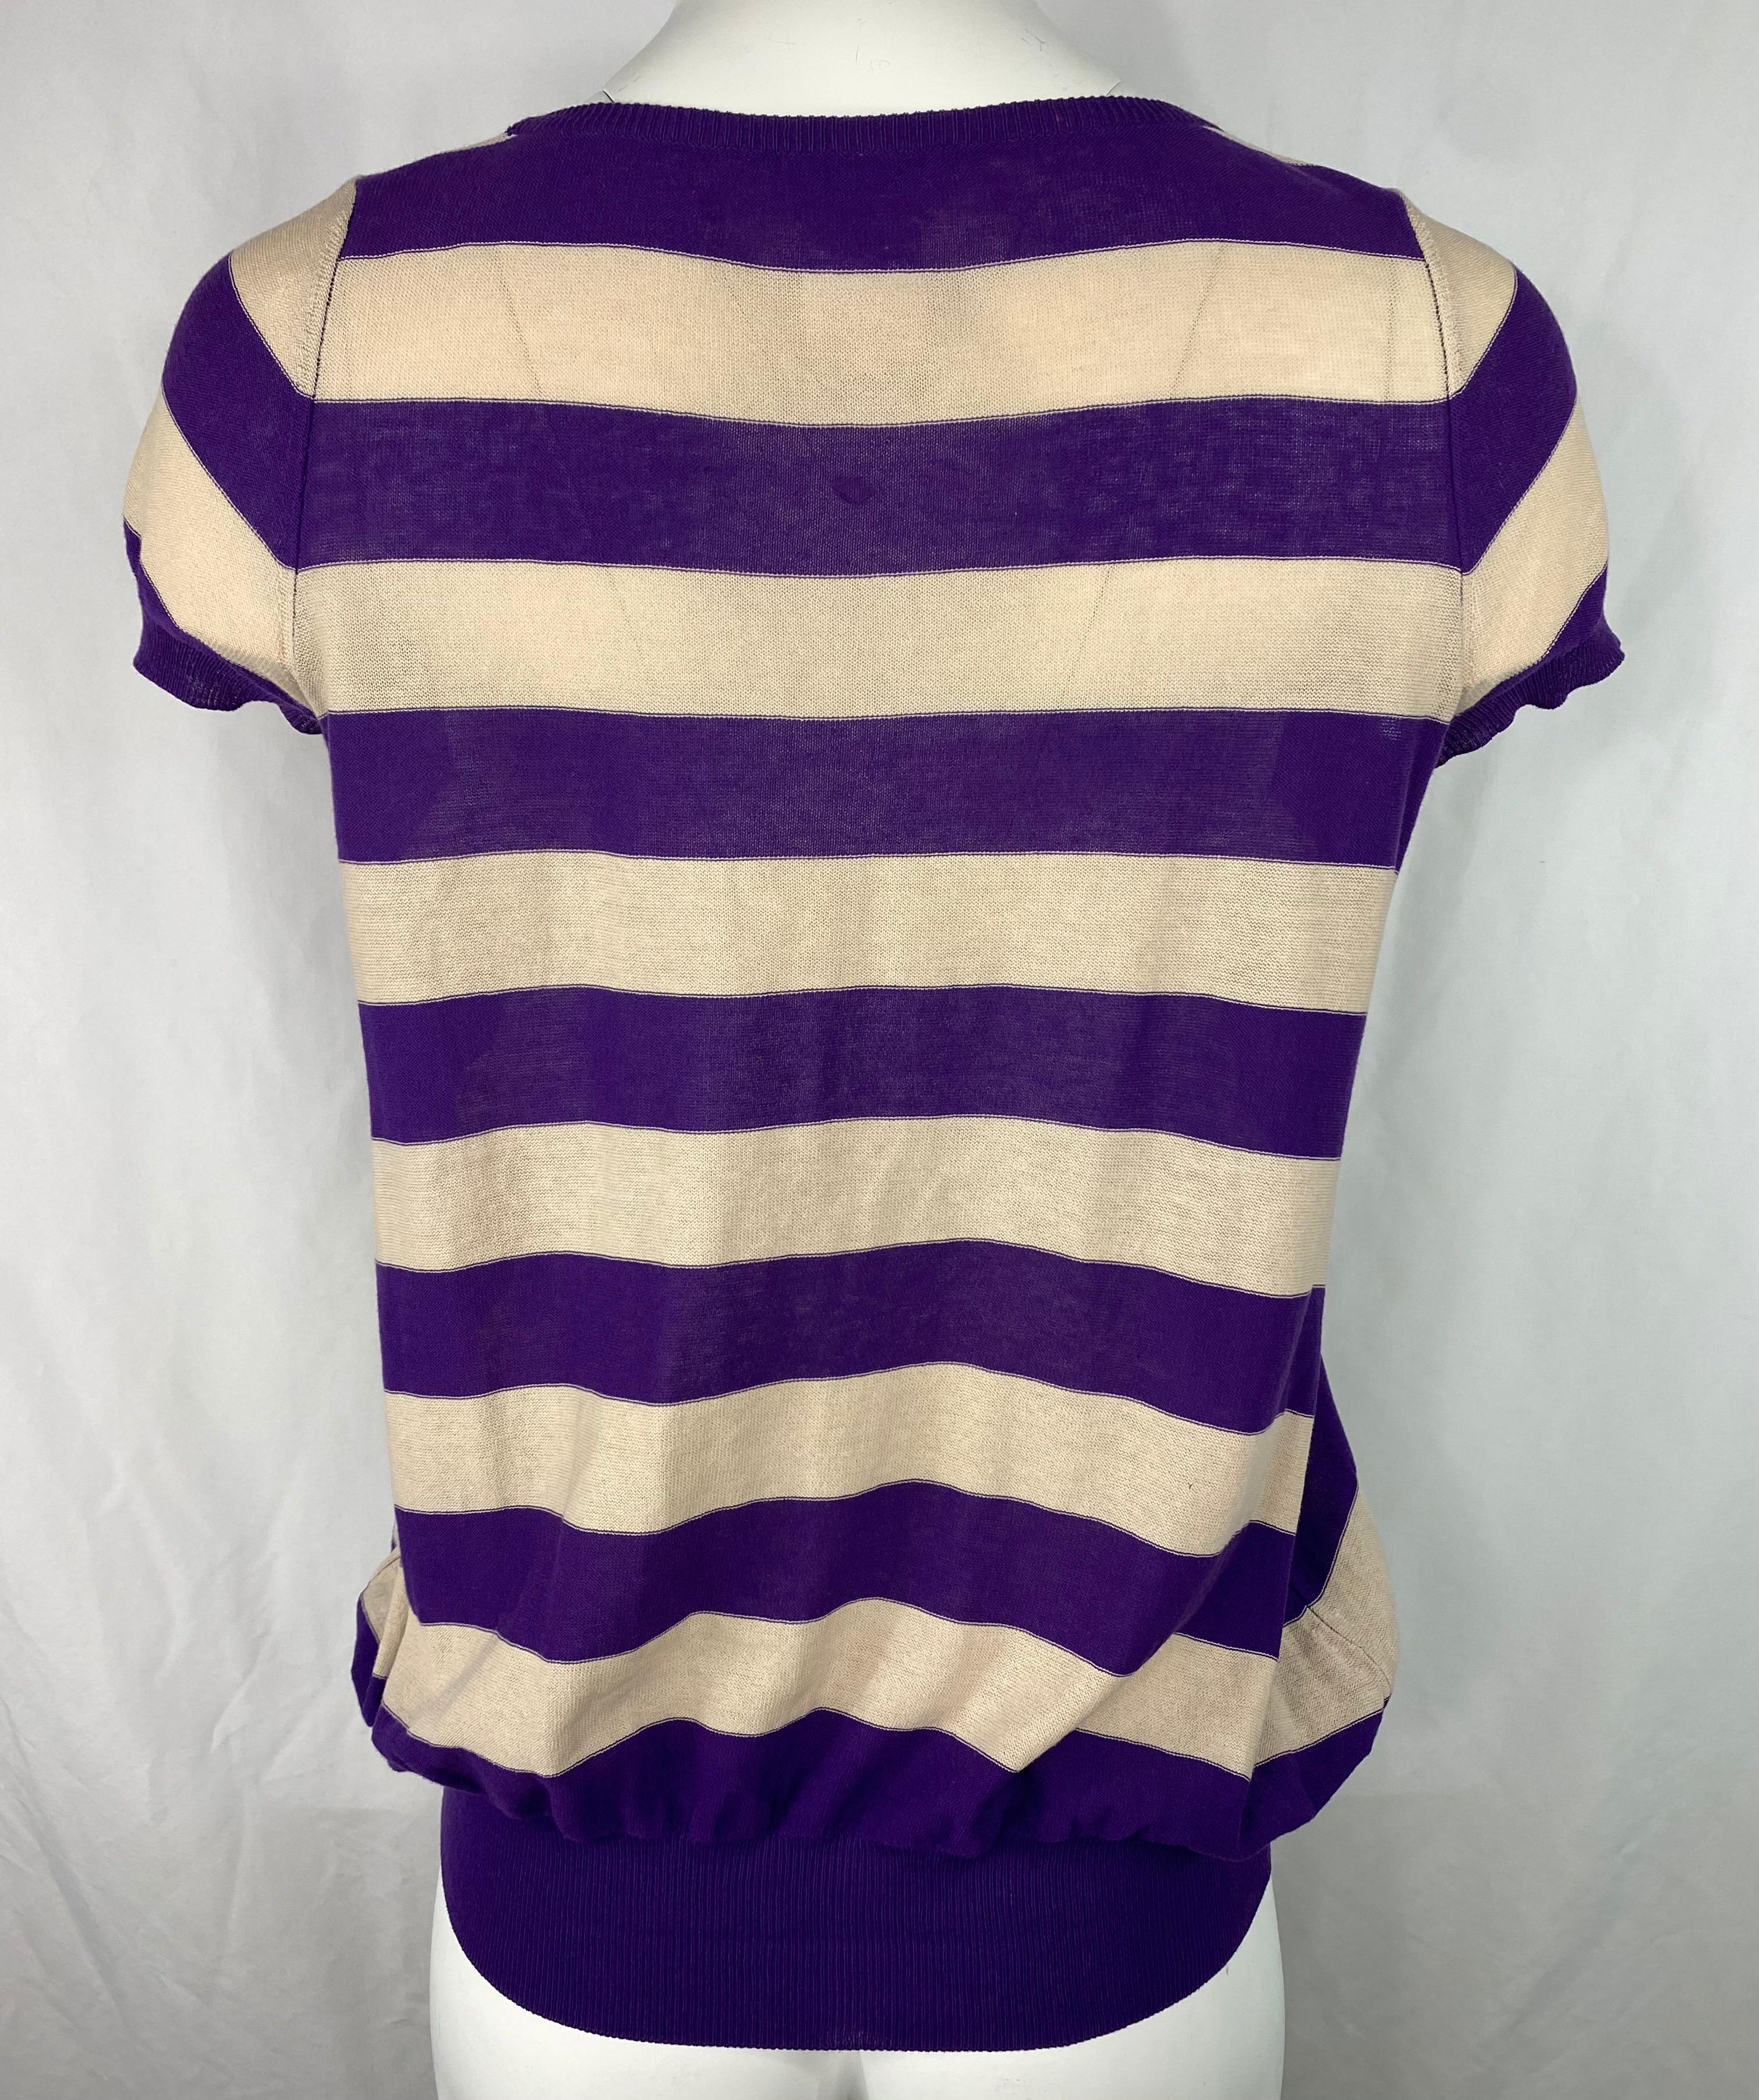 Vintage Sonia Rykiel Purple and Cream Striped Top, Size 38 In Excellent Condition For Sale In Beverly Hills, CA